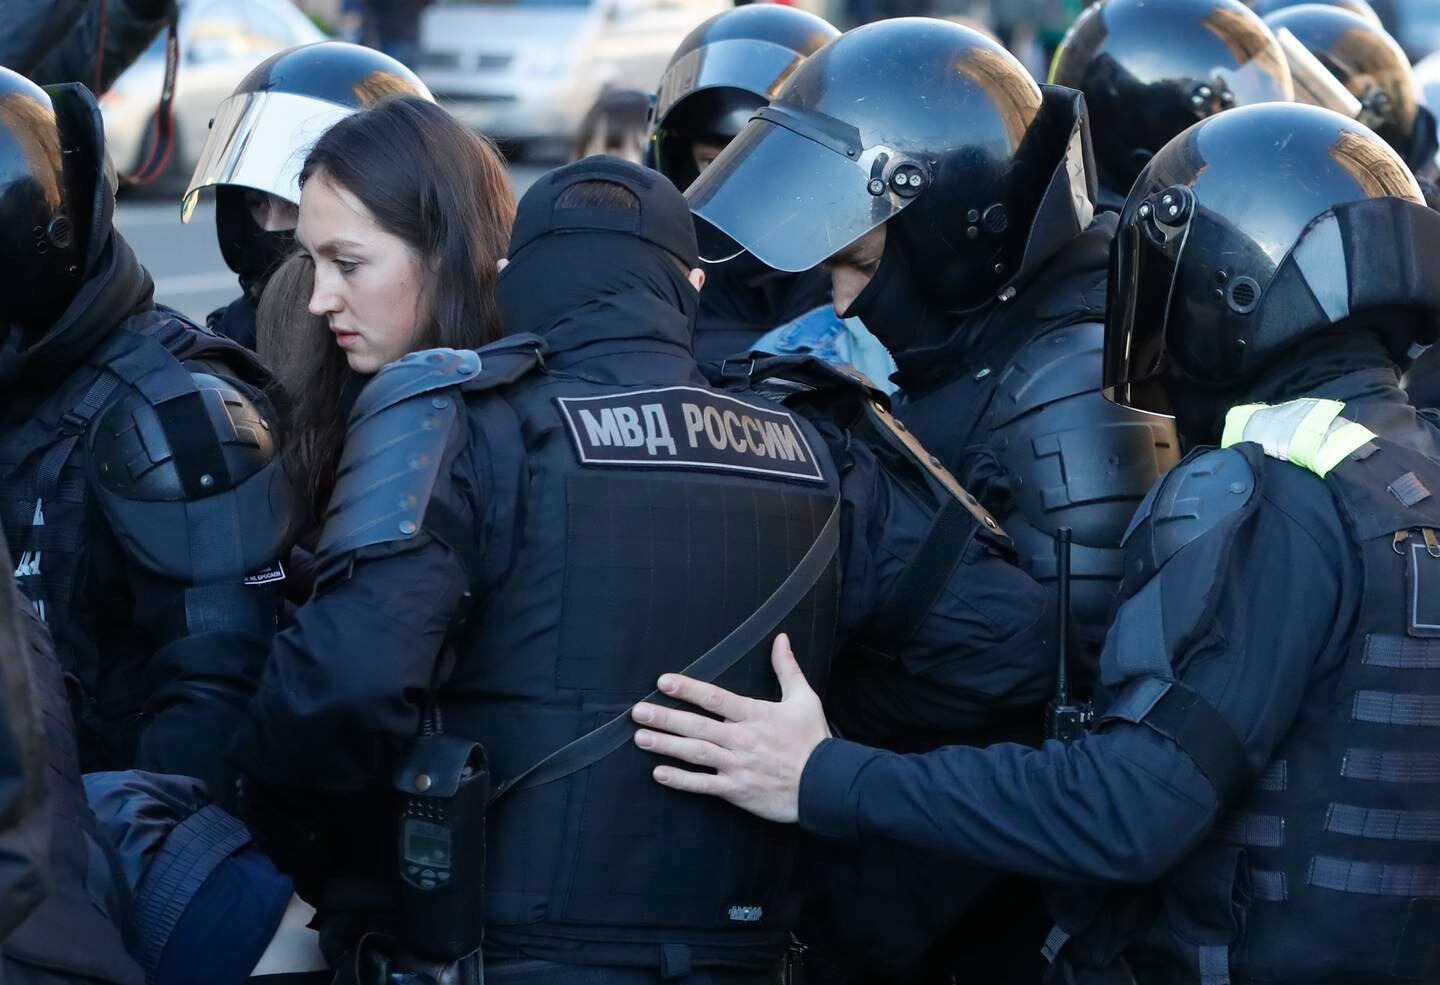 Police detain a person taking part in a protest in St Petersburg.  EPA